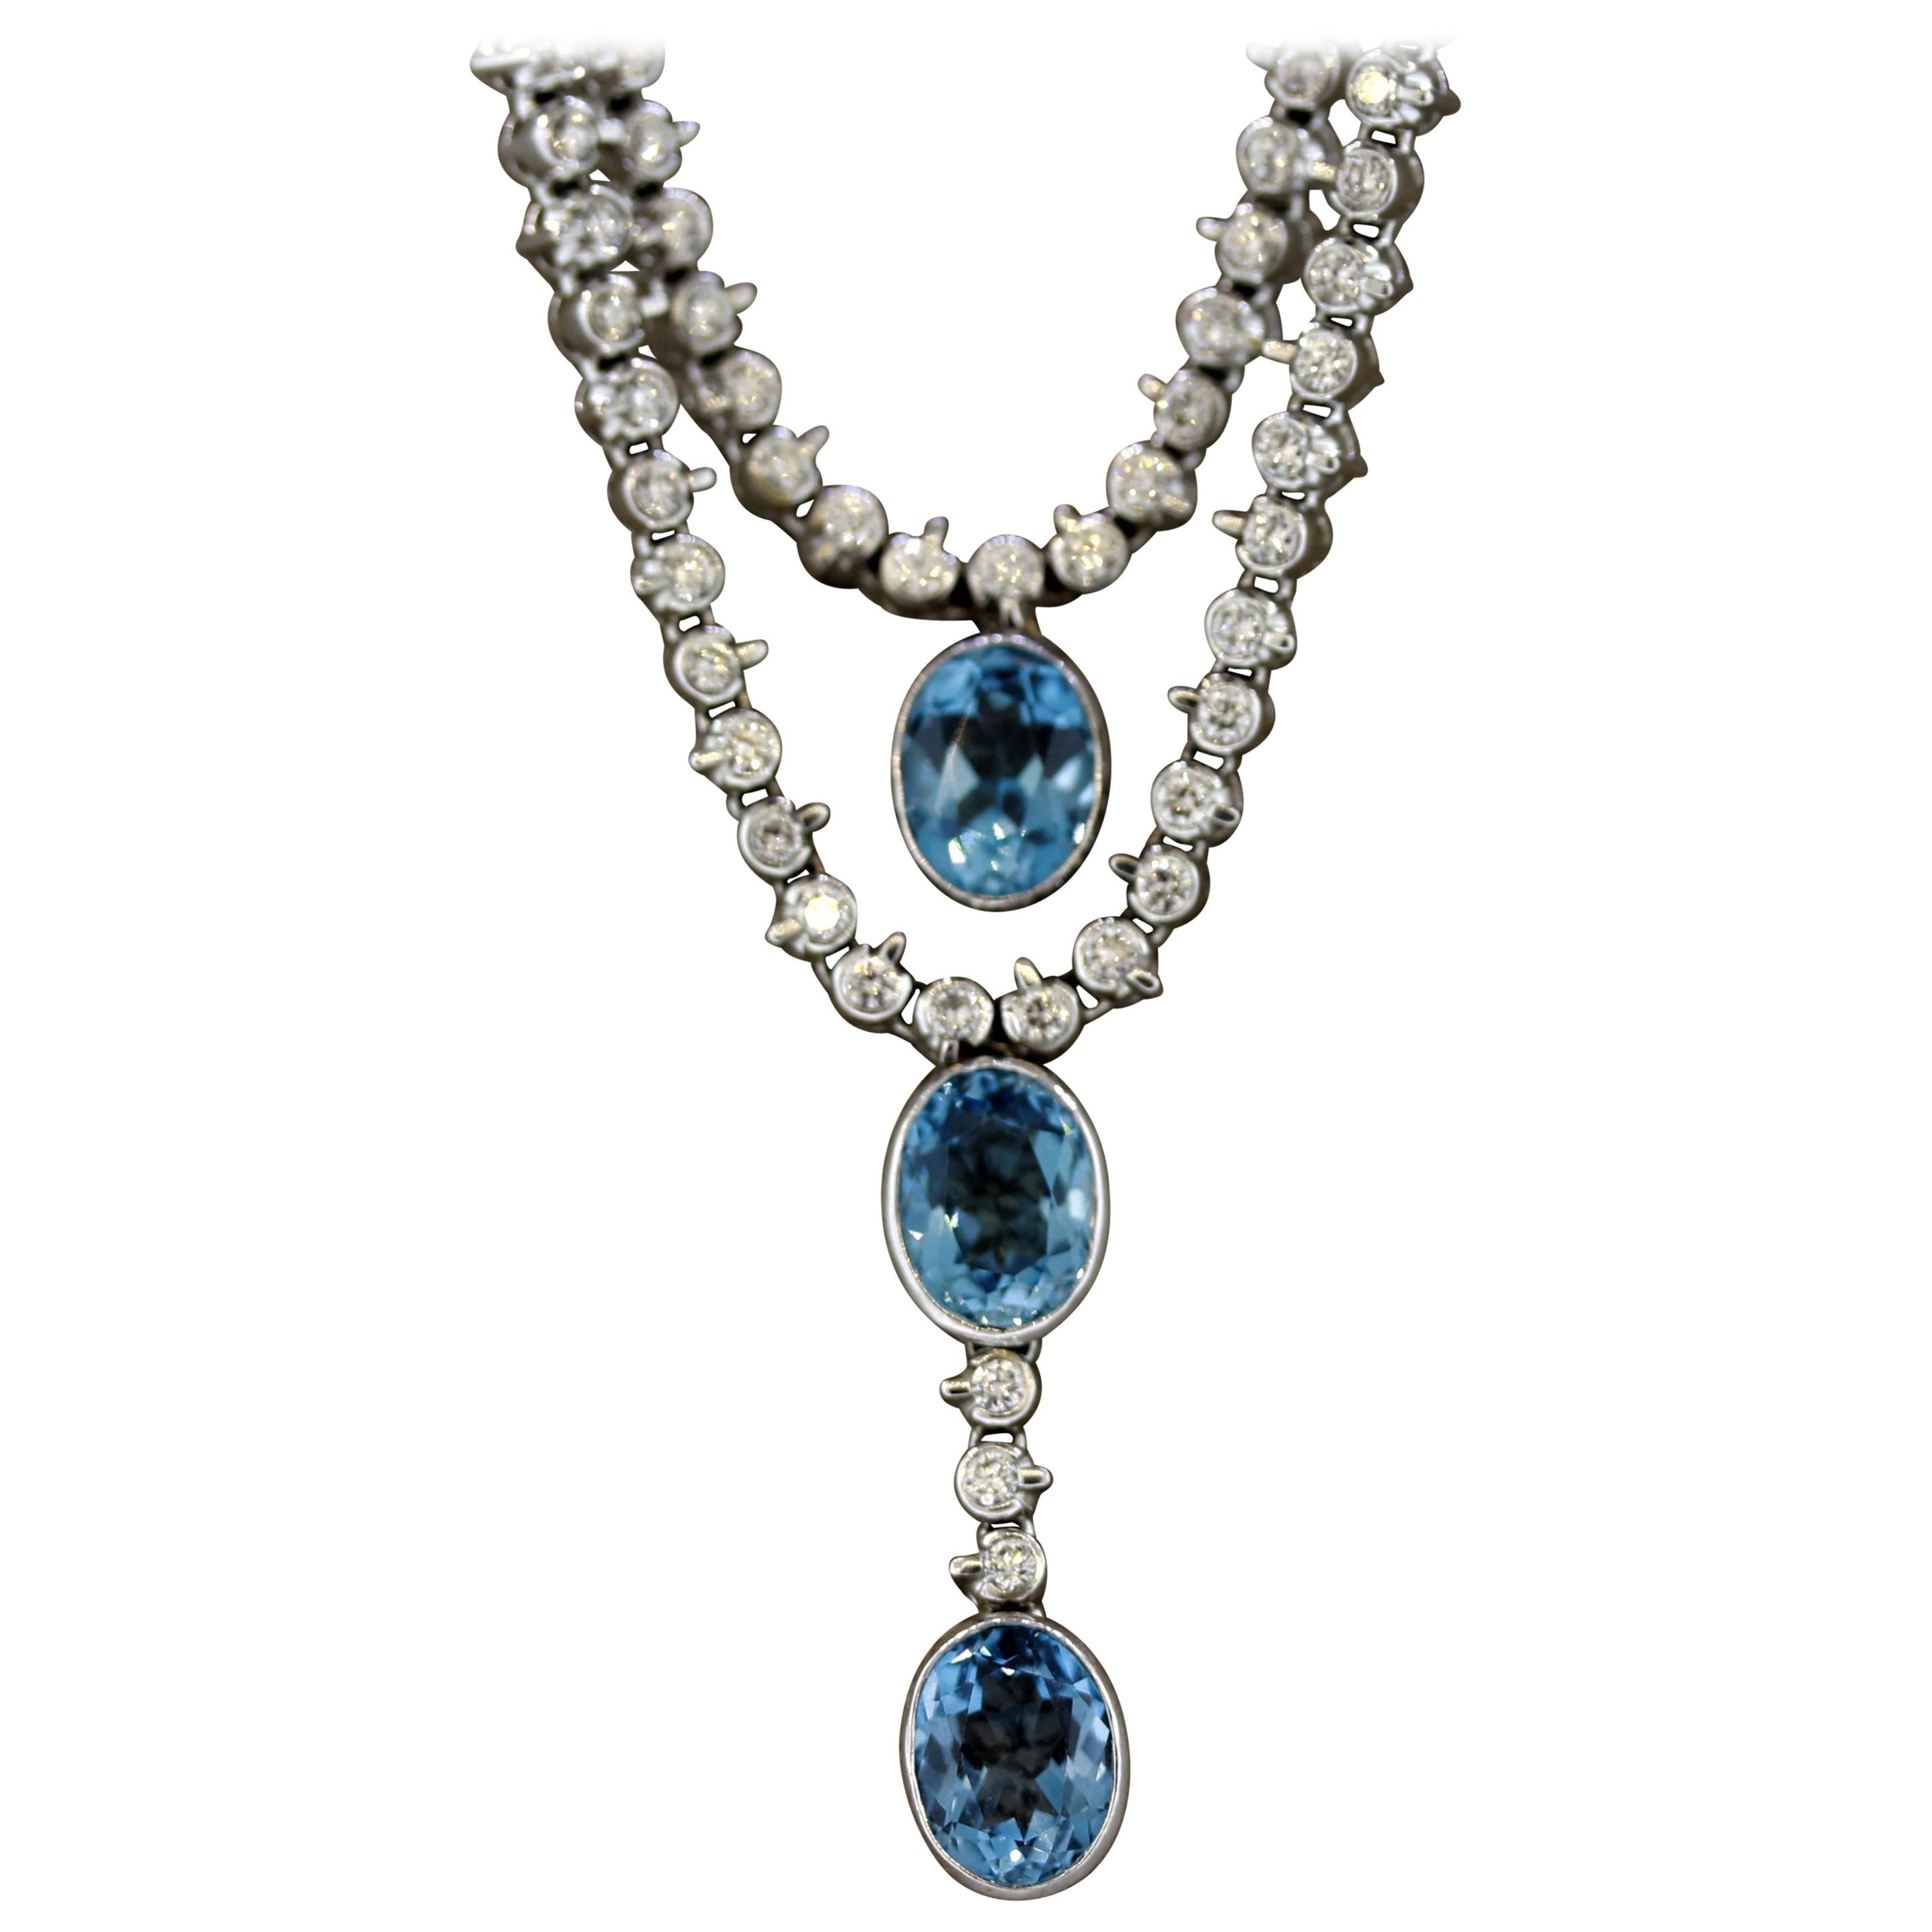 A sweet and elegant necklace featuring 3 large swiss blue topaz. They are cut in matching oval shapes and have a bright rich sky-blue color giving them the trade name “swiss” topaz. They are accented by 5.90 carats of round brilliant cut diamonds